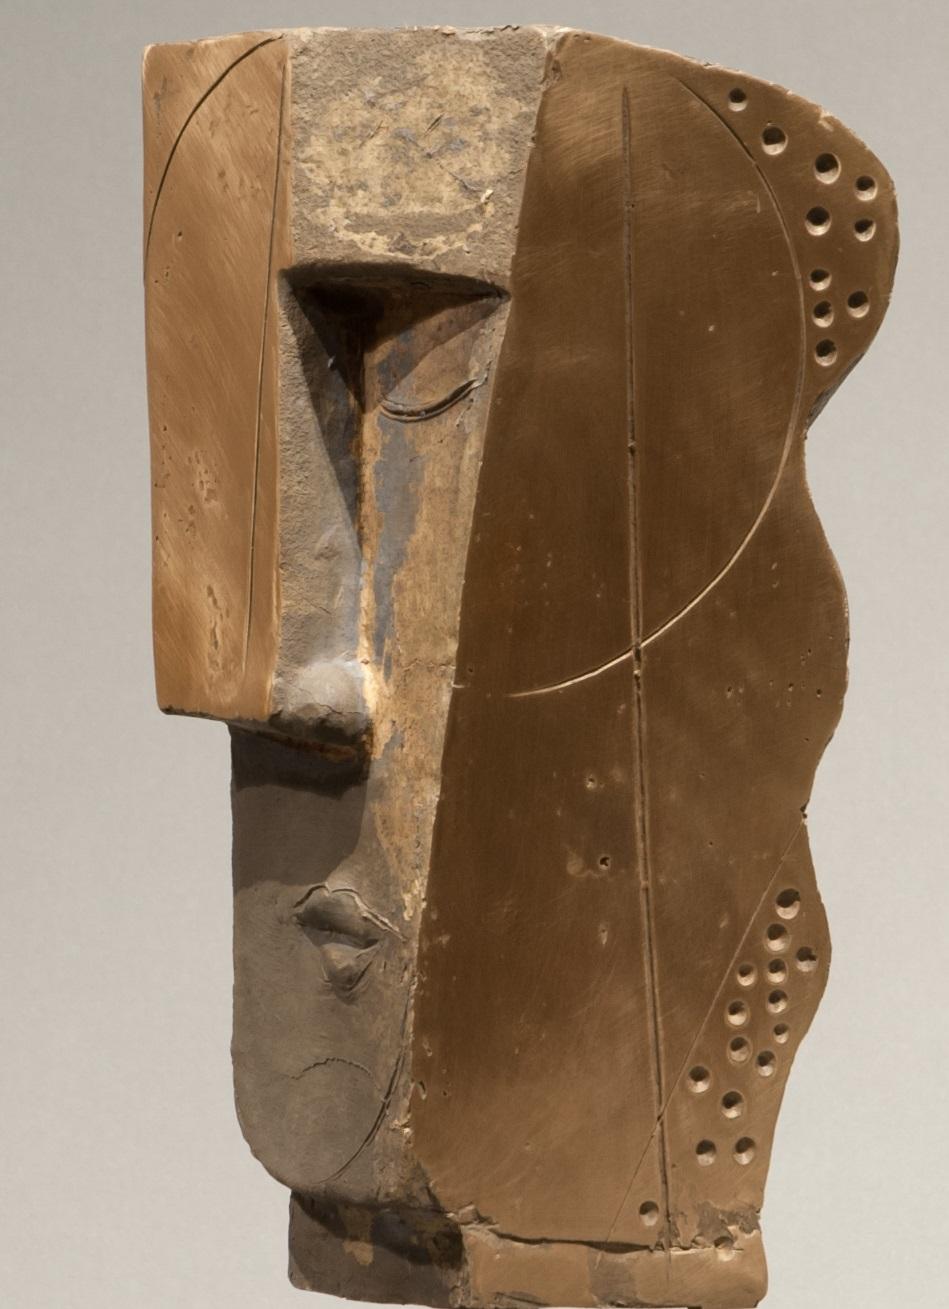 Cubicus Bronze Sculpture Figurative Abstract Geometric Head In Stock

Junghans (1956, Recklinghausen) creates abstract sculptures in stone, wood and bronze, mostly torsos and primal portraits, in a primitive, cubic and expressionistic imagery. He